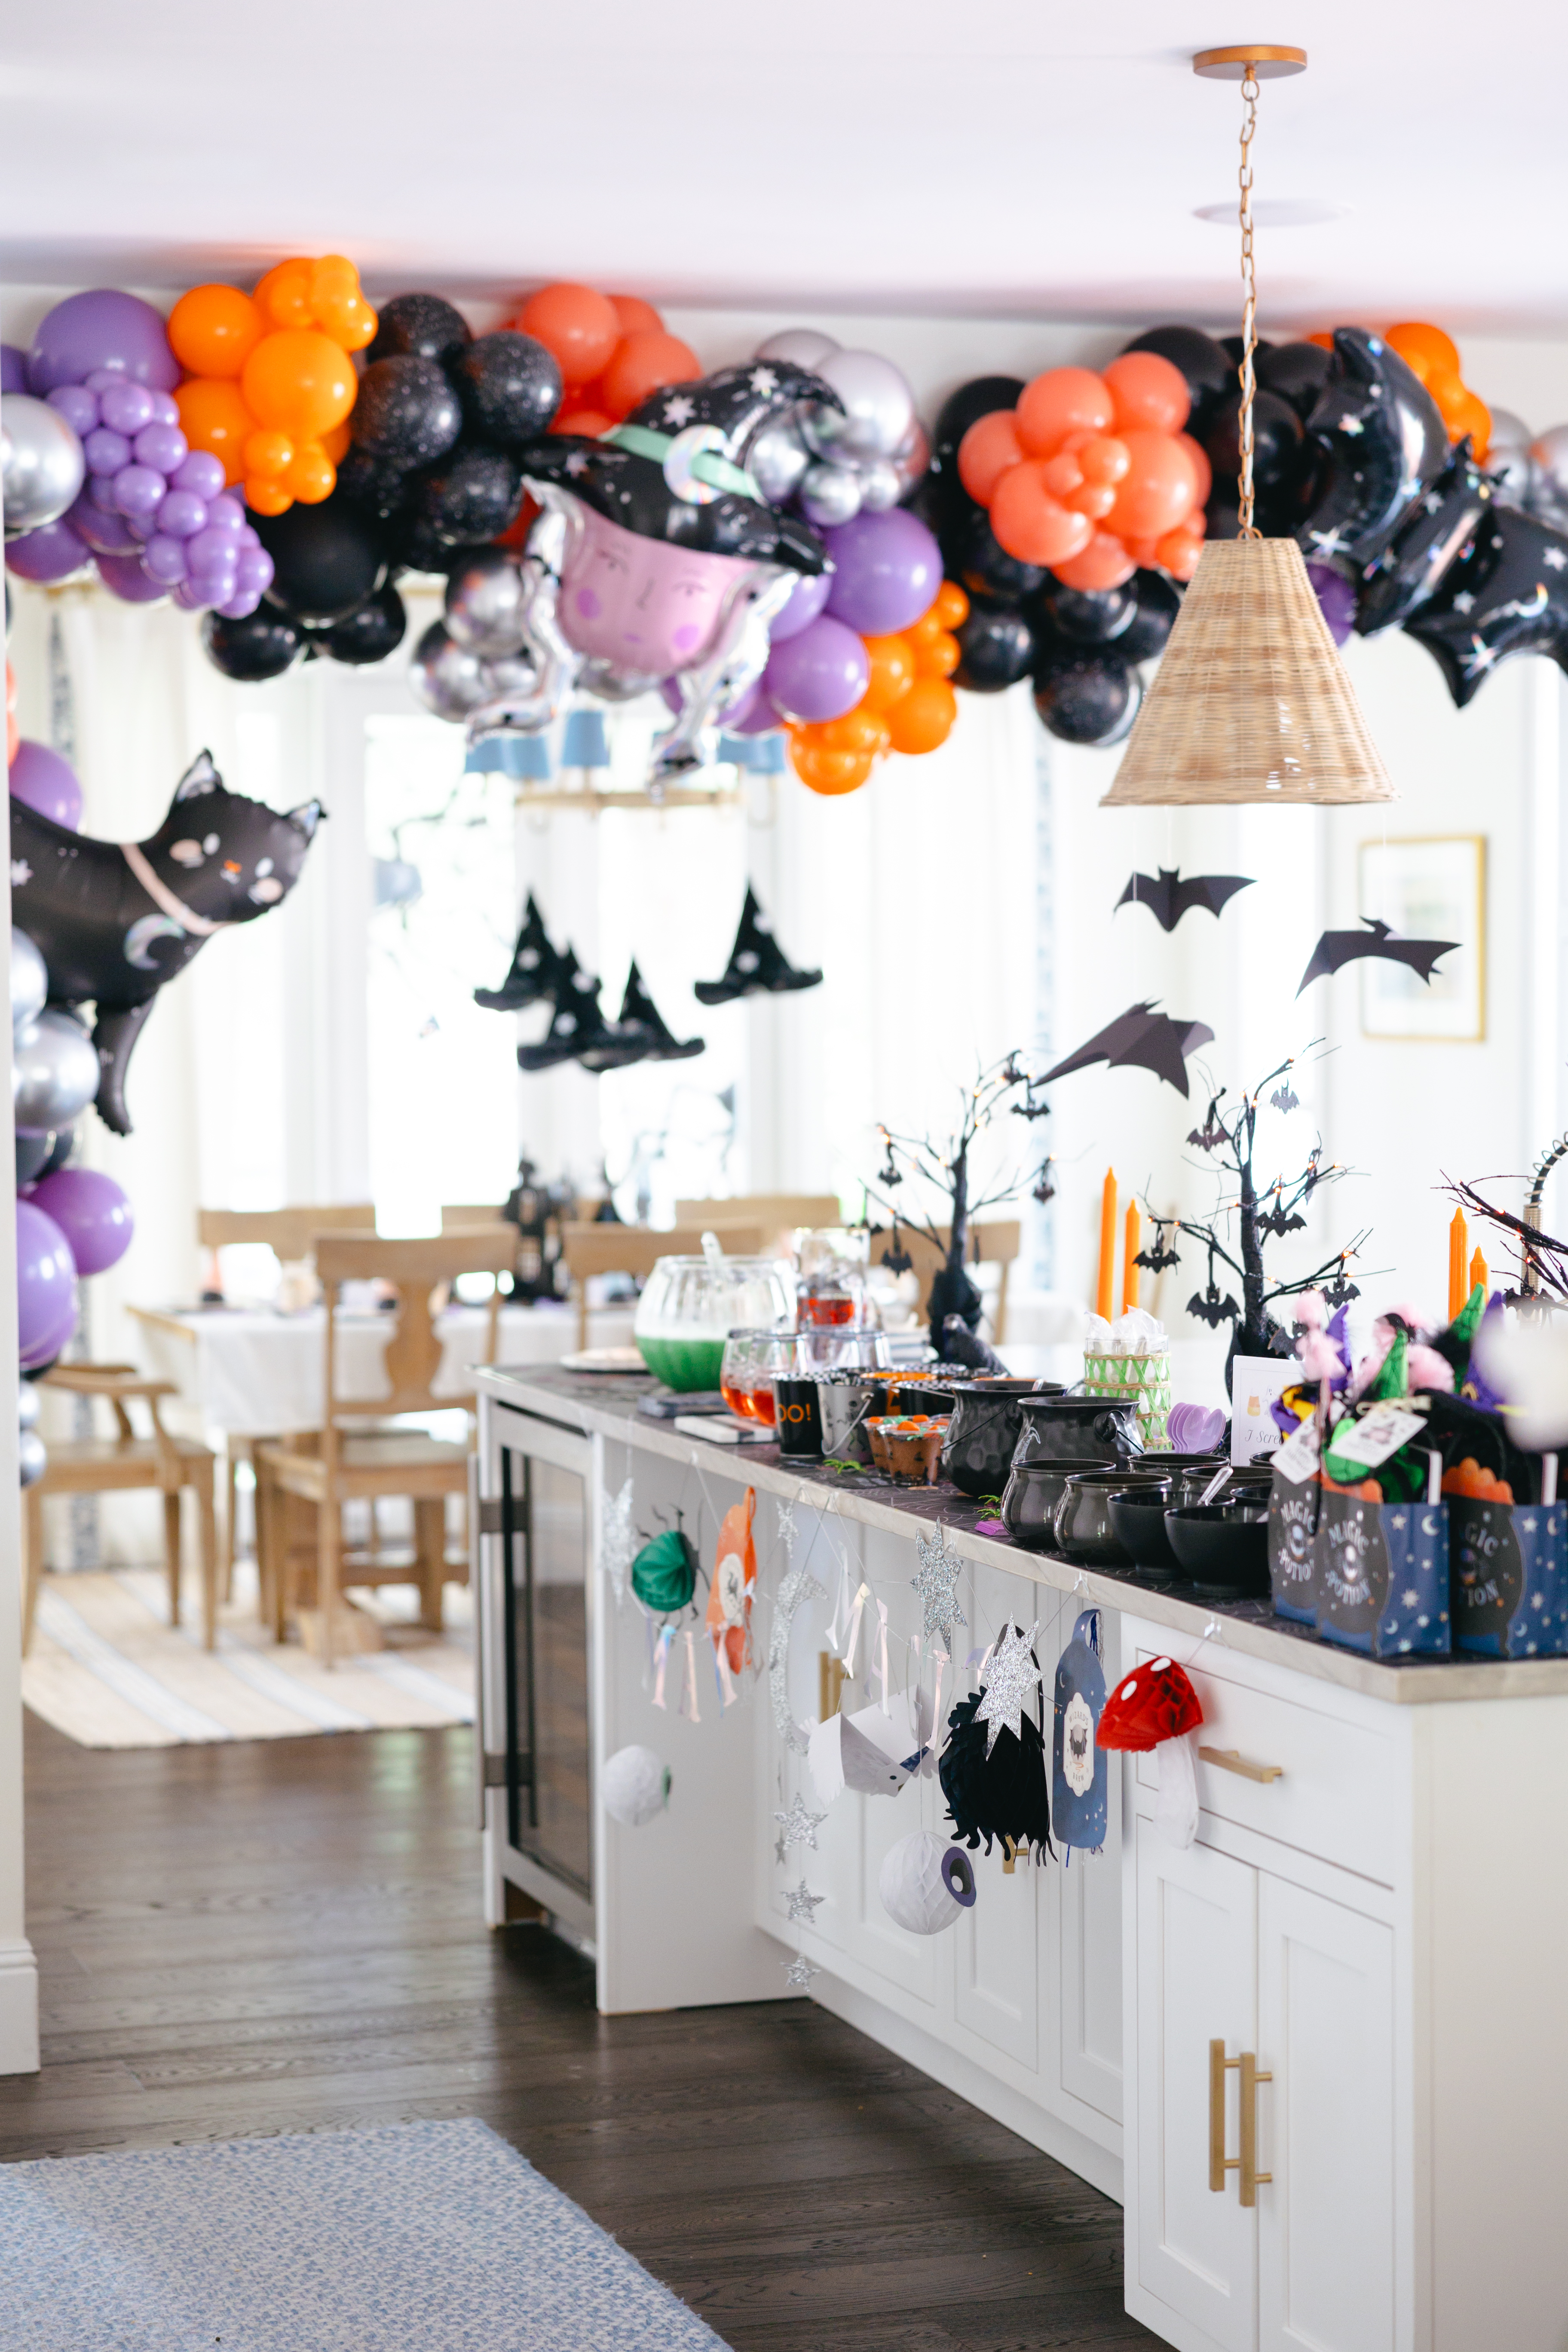 Buffet setup with balloons in black, orange and purple